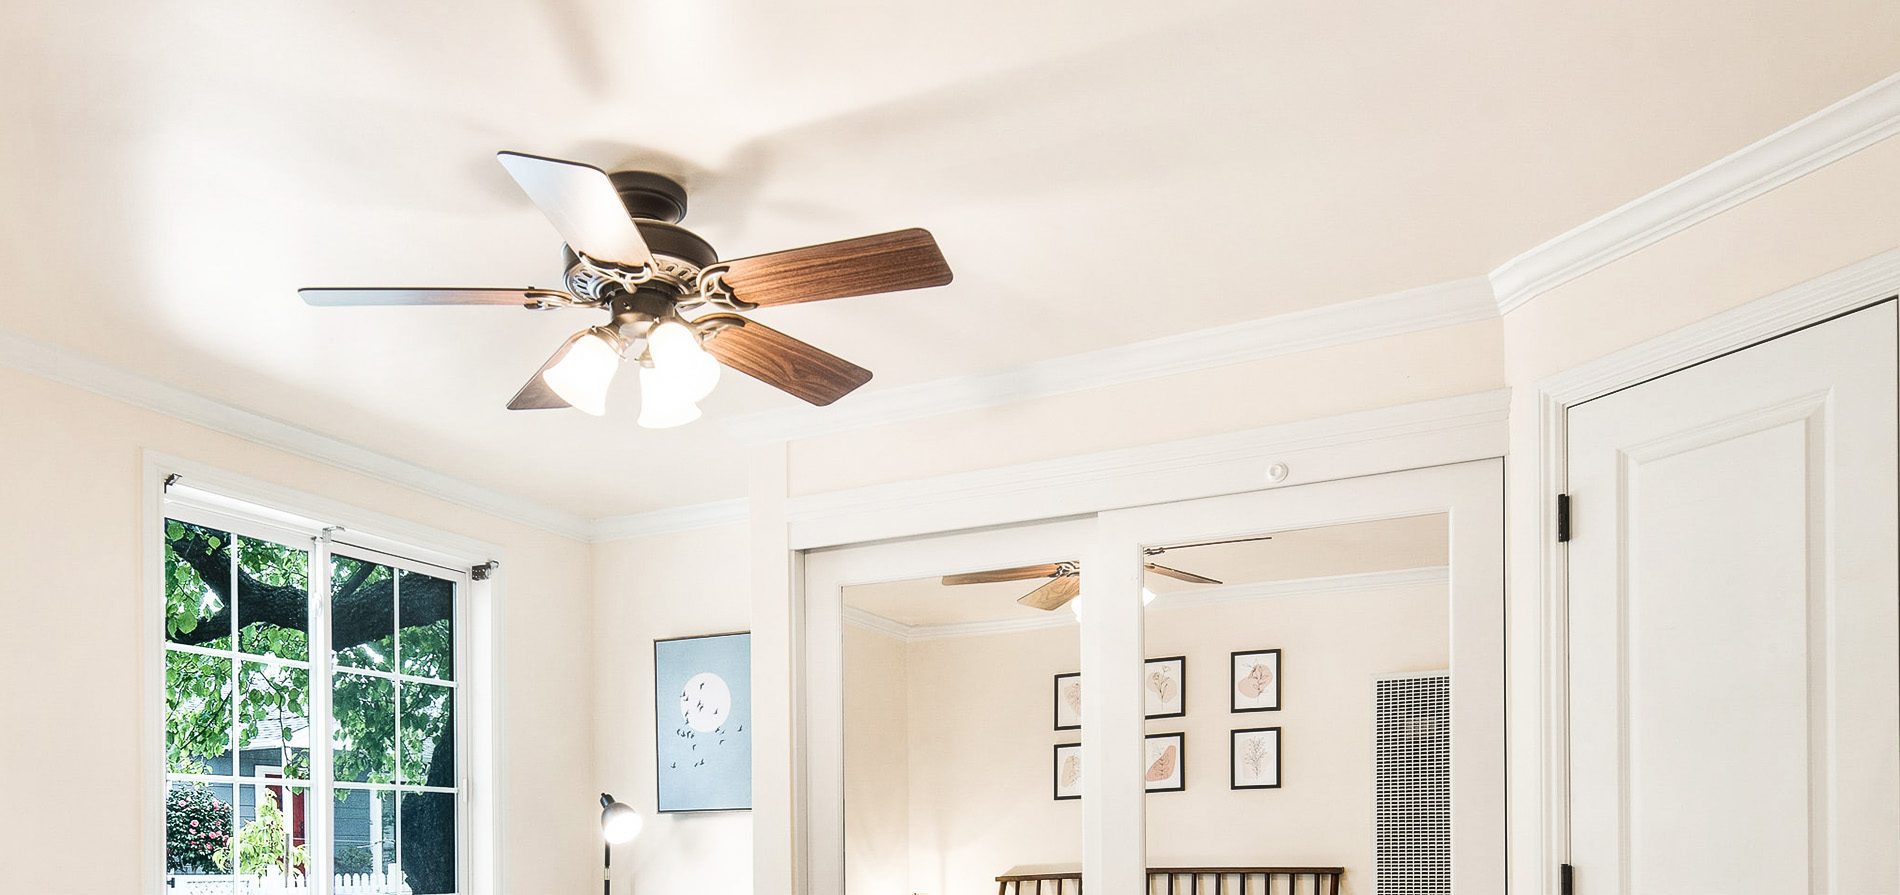 A ceiling fan with LEDs provides the right lighting and can provide a fresh breeze in summer thanks to the large rotor blades, even with just a few revolutions (Photo: Unsplash).